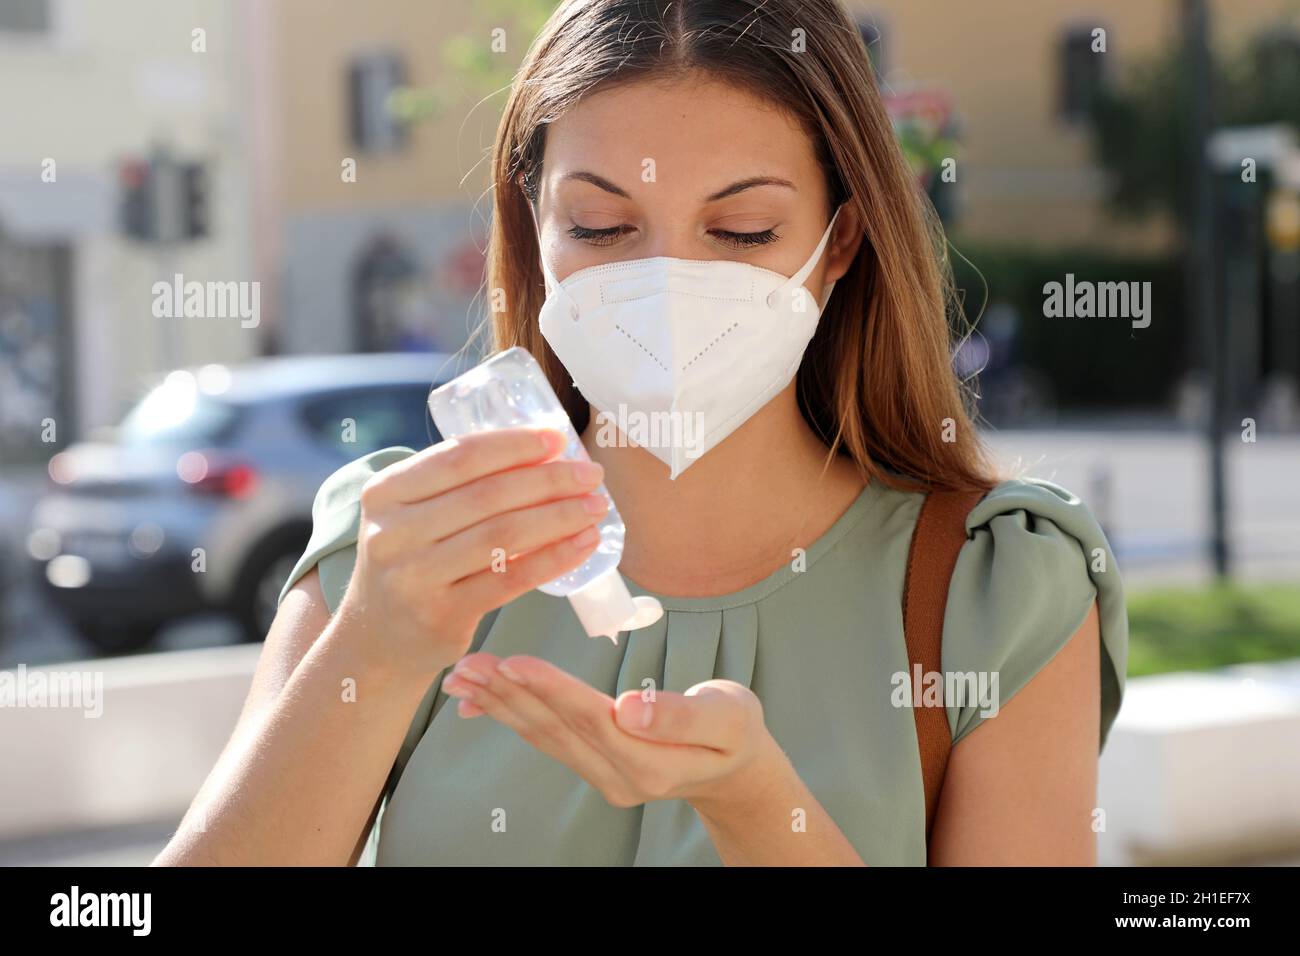 COVID-19 Pandemic Coronavirus Close up Woman with KN95 FFP2 Mask using Alcohol Gel Sanitizer Hands in City Street. Antiseptic, Hygiene and Healthcare Stock Photo